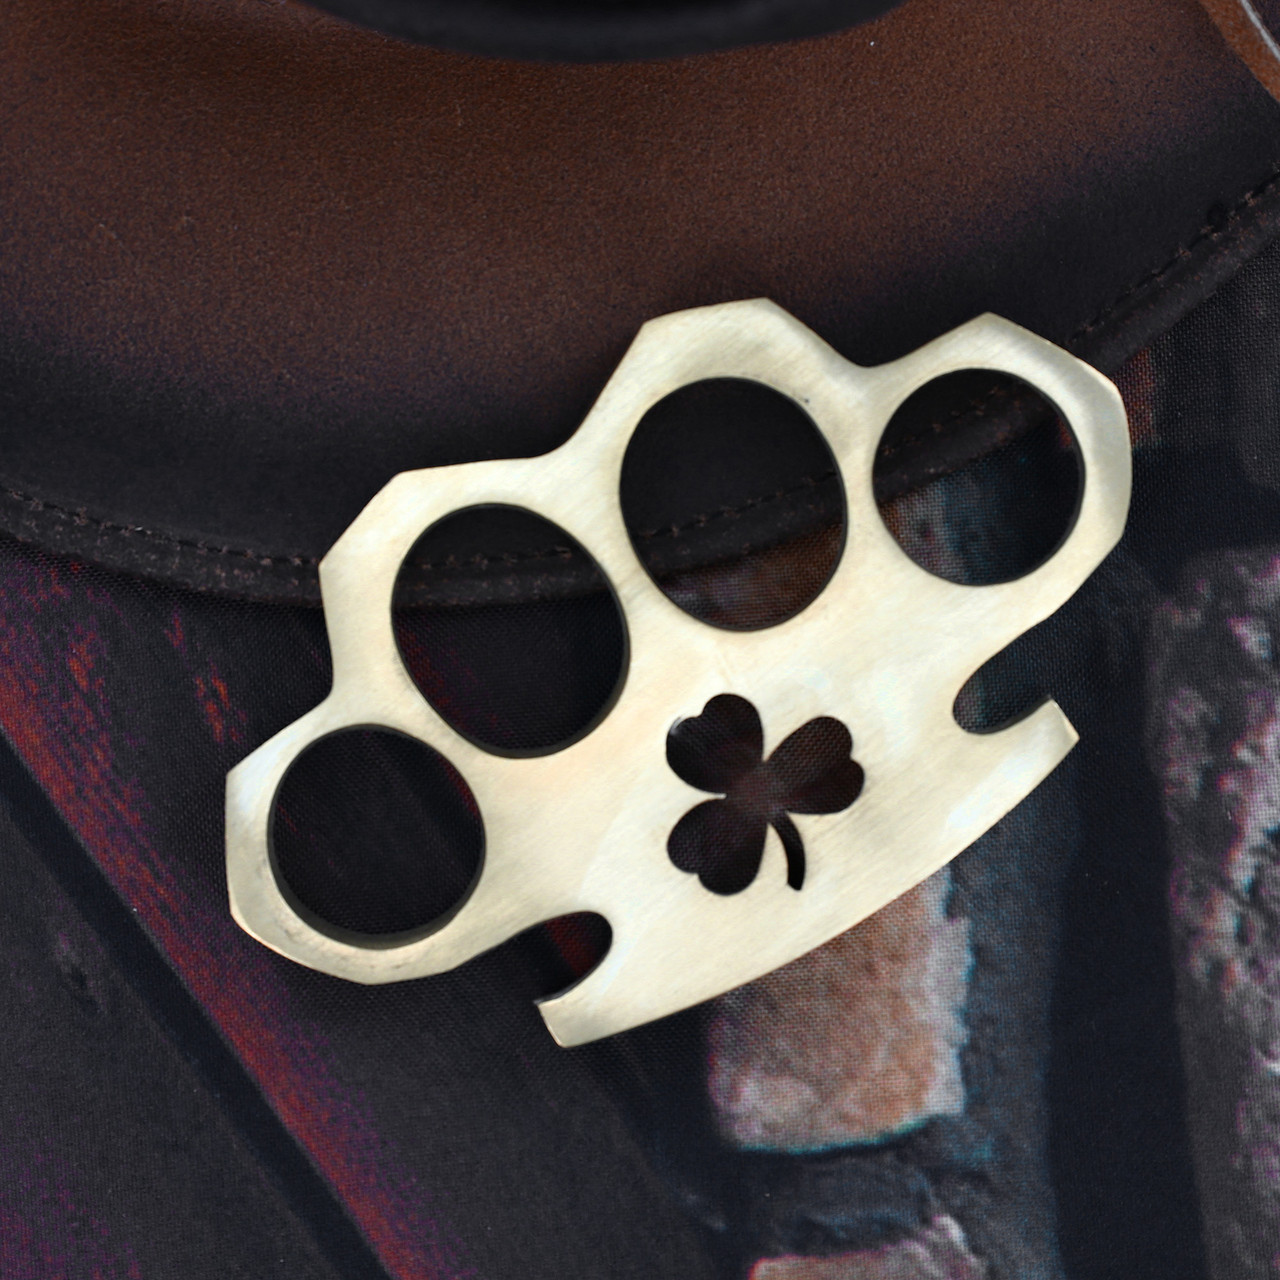 Lucky Punch 100% Pure Brass Knuckle Duster Novelty Paper Weight